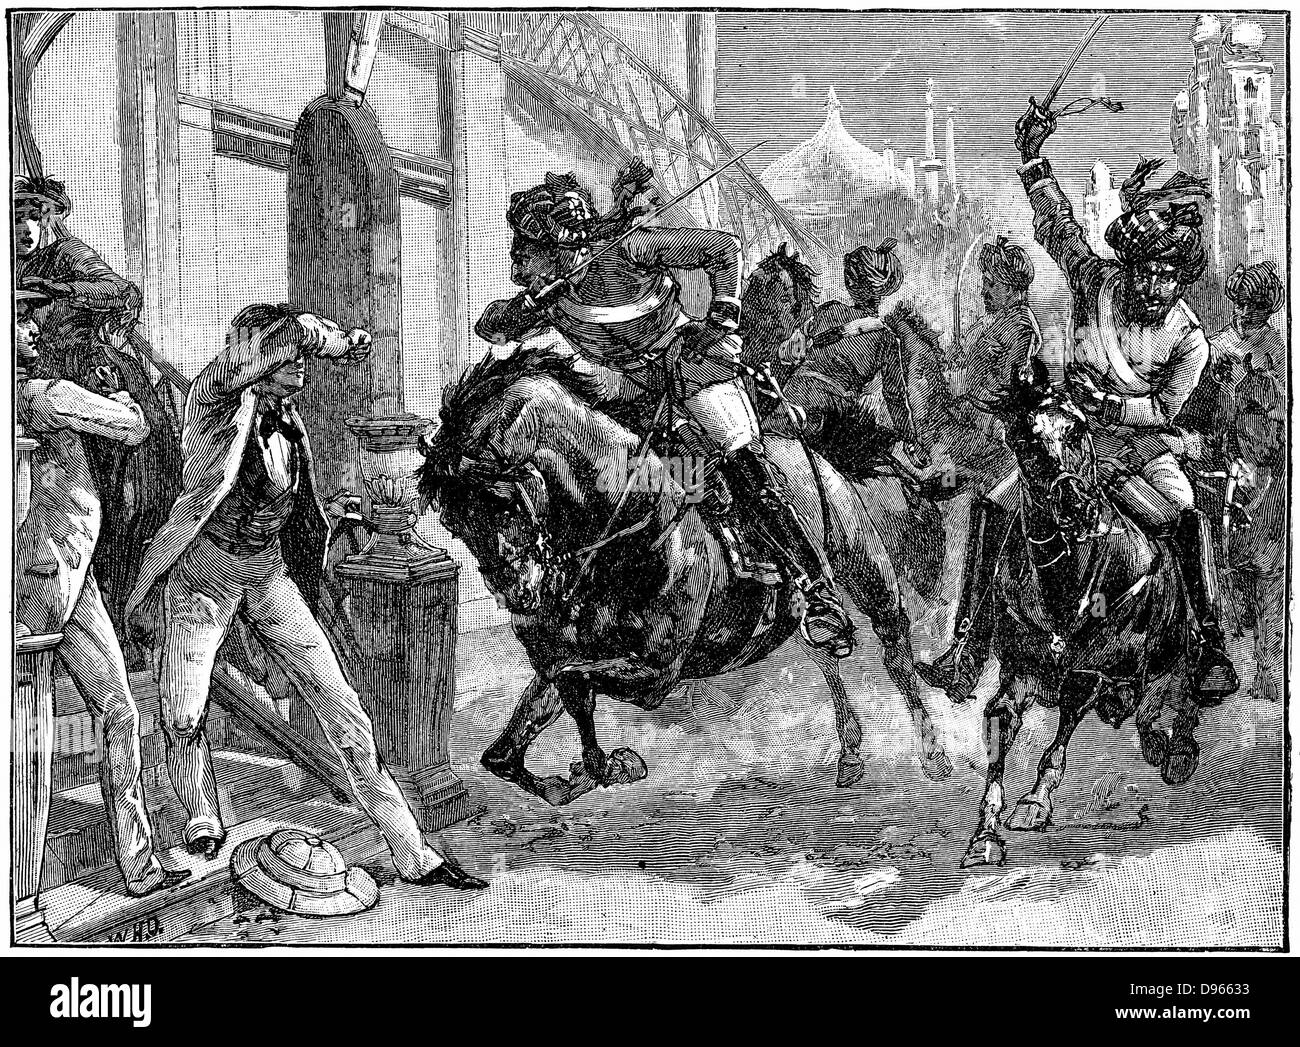 Indian Mutiny (Sepoy Mutiny) 1857-1859: Mounted rebel Sepoys charging through the streets of Delhi - May 1857. Engraving published c1895. Stock Photo